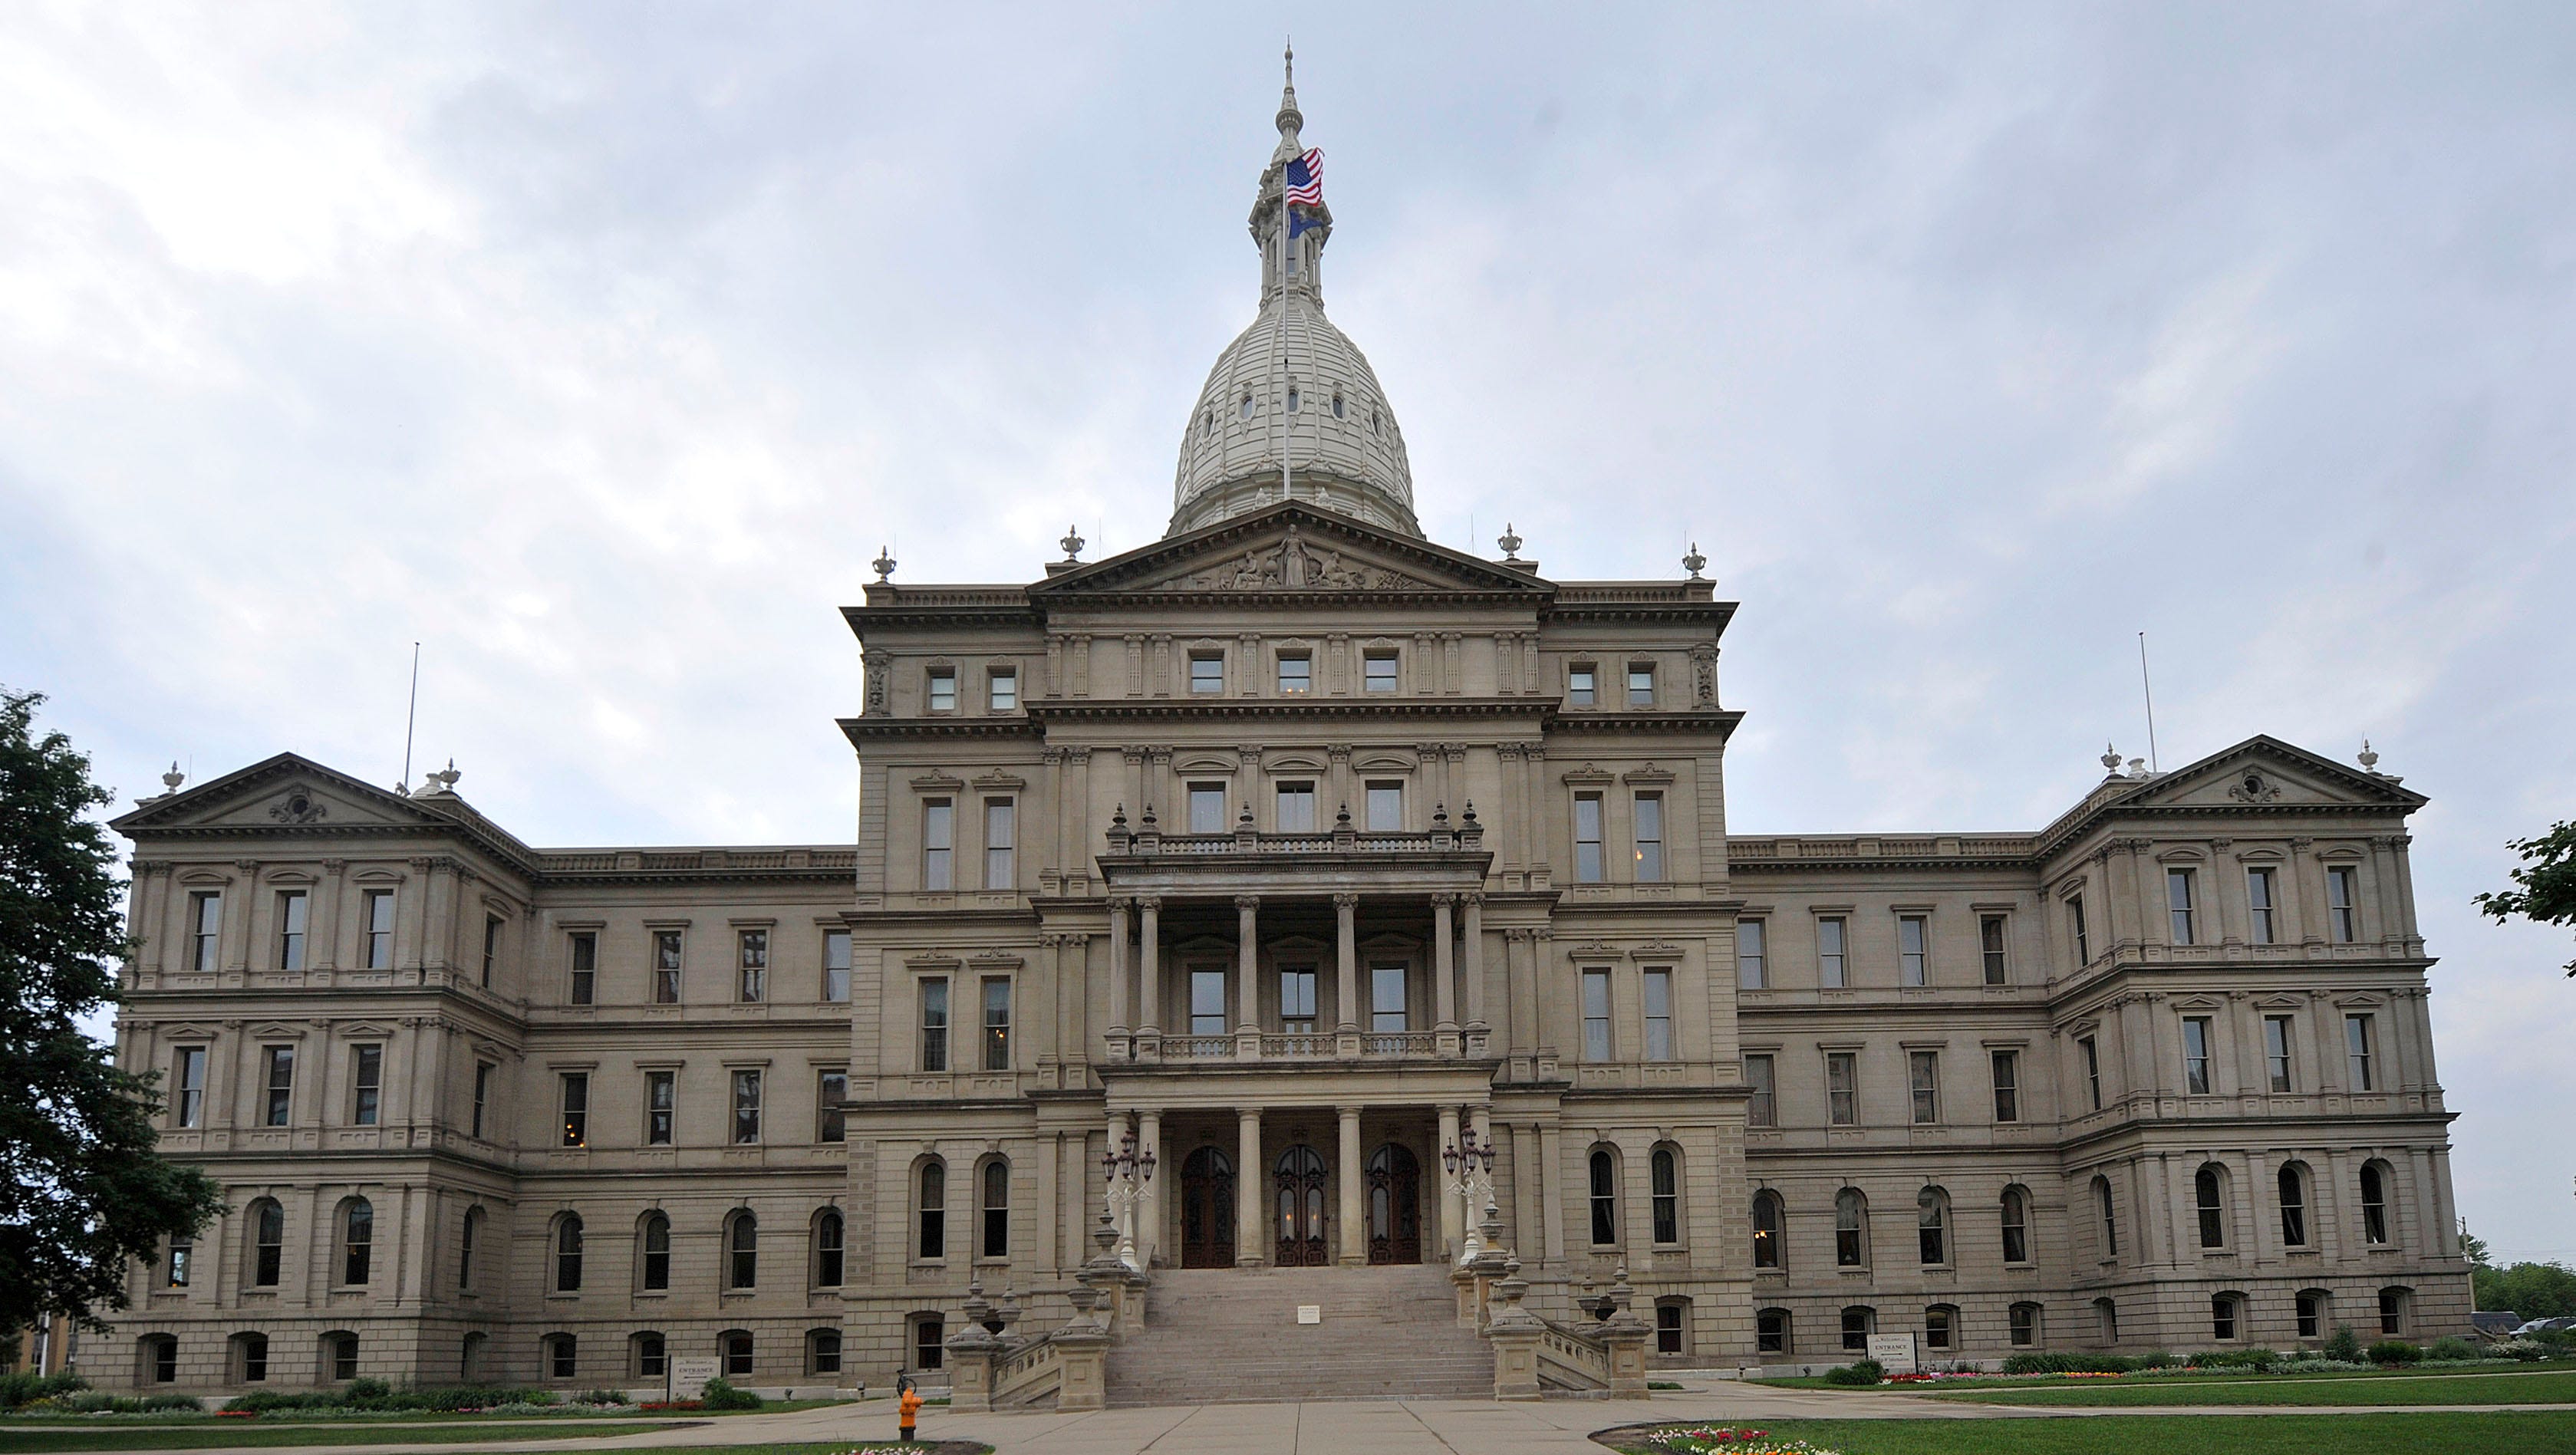 House legislators on Wednesday are expected to vote on the repeal of a decades-old law that requires contractors to pay workers union wages and benefits for state-funded construction projects.